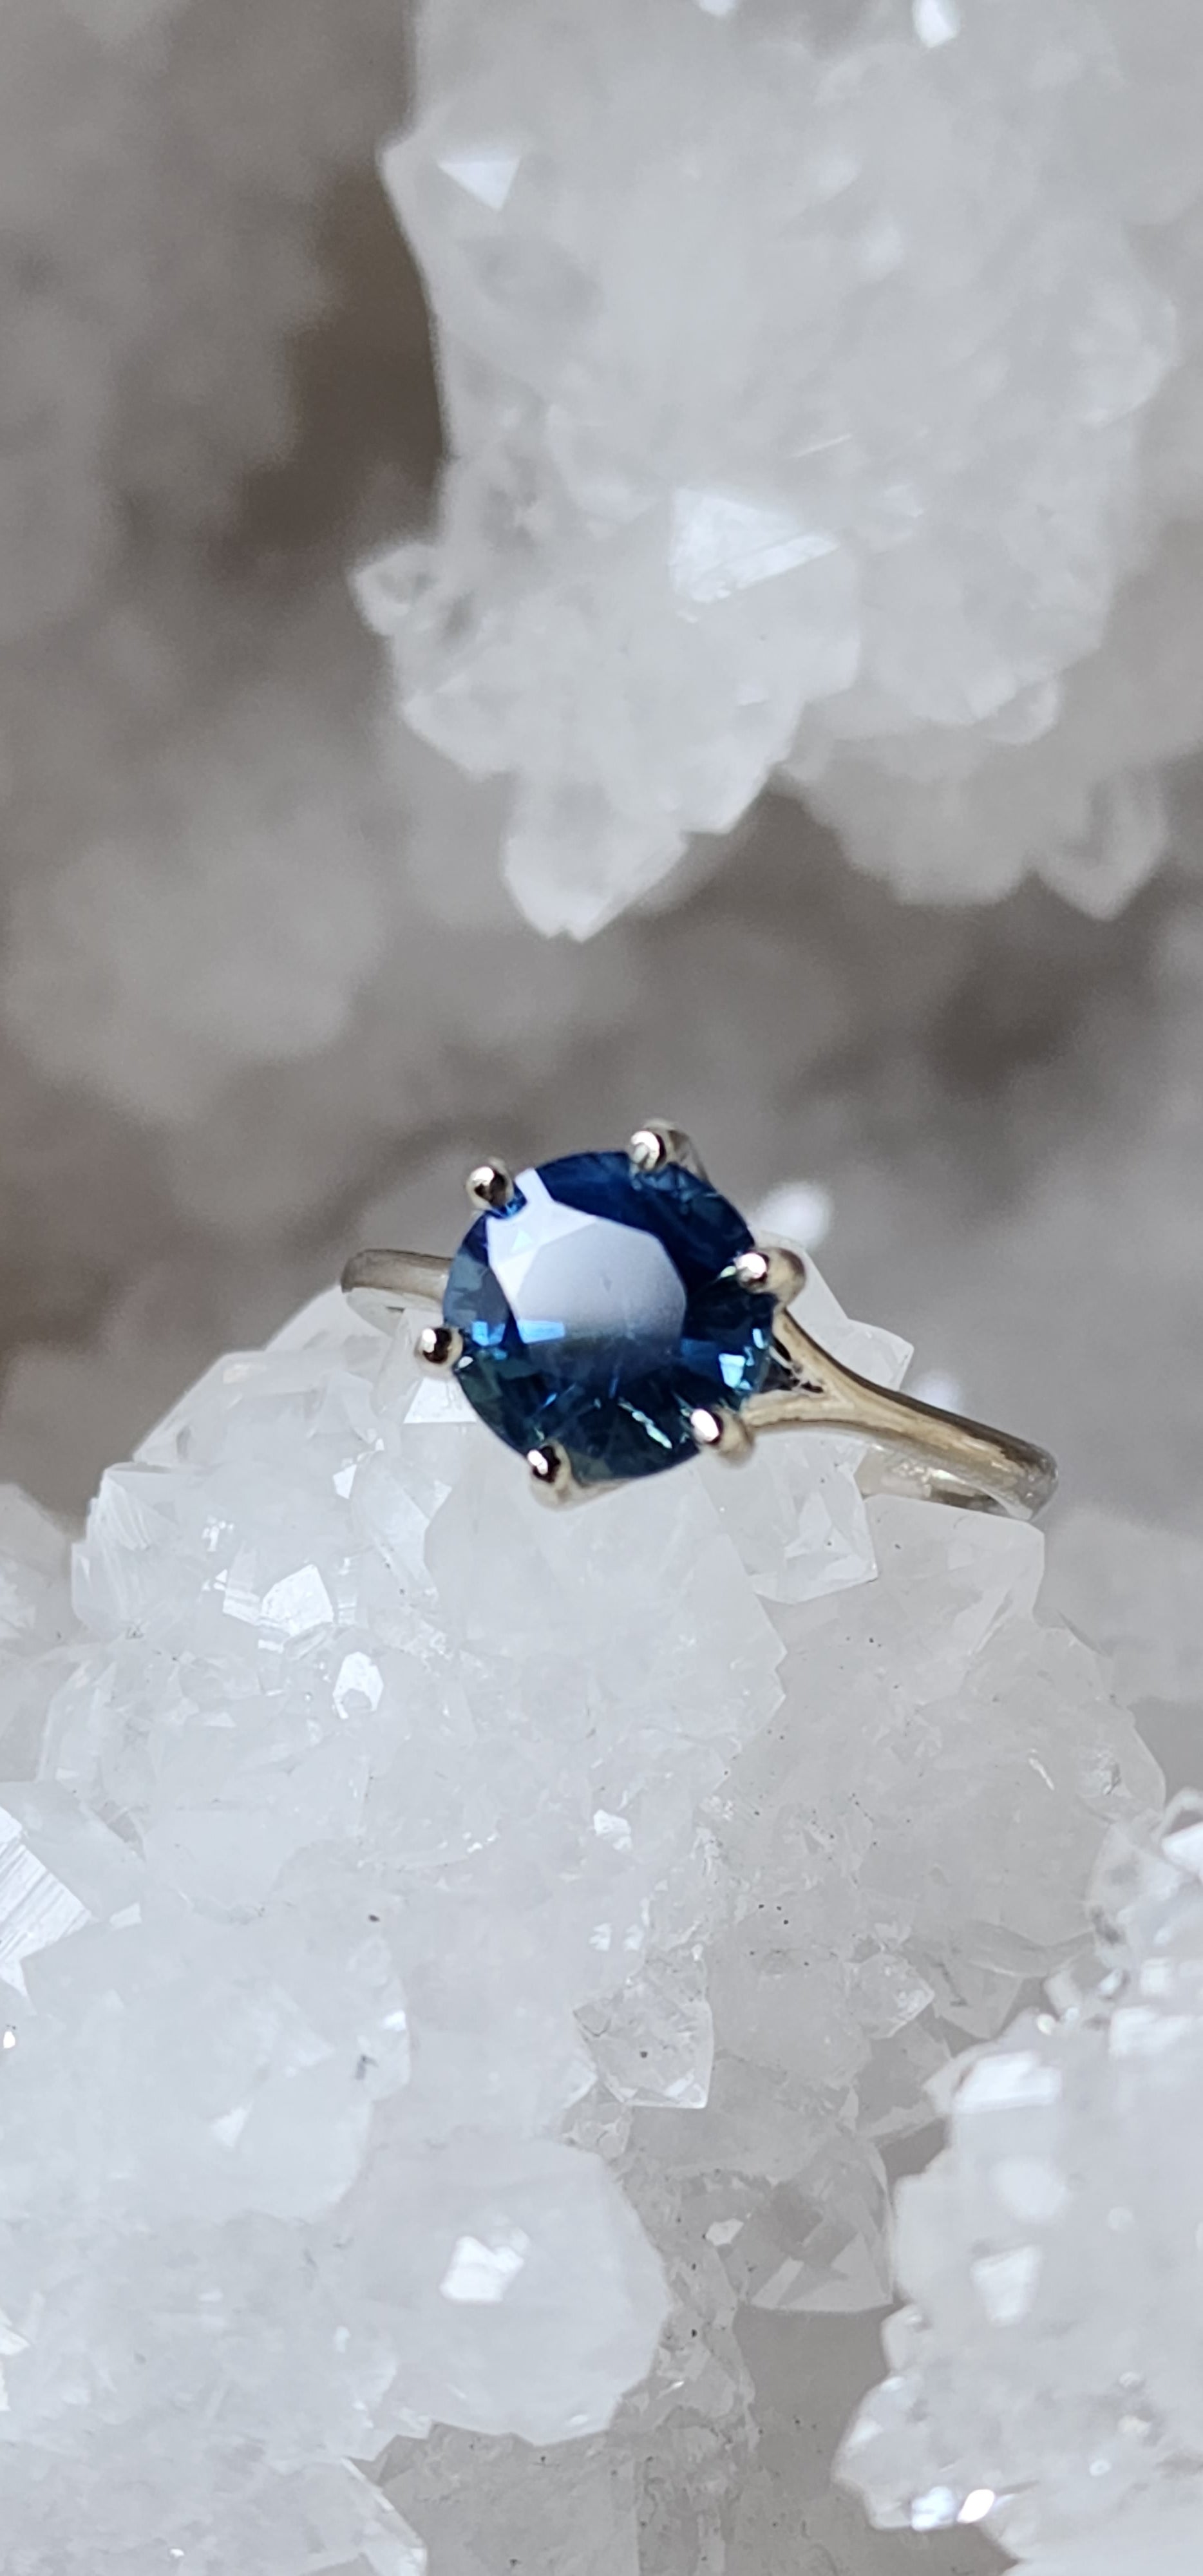 Ring - 2.64 CT Madagascar Sapphire Teal Round Solitaire 6 Prong 14K White Gold